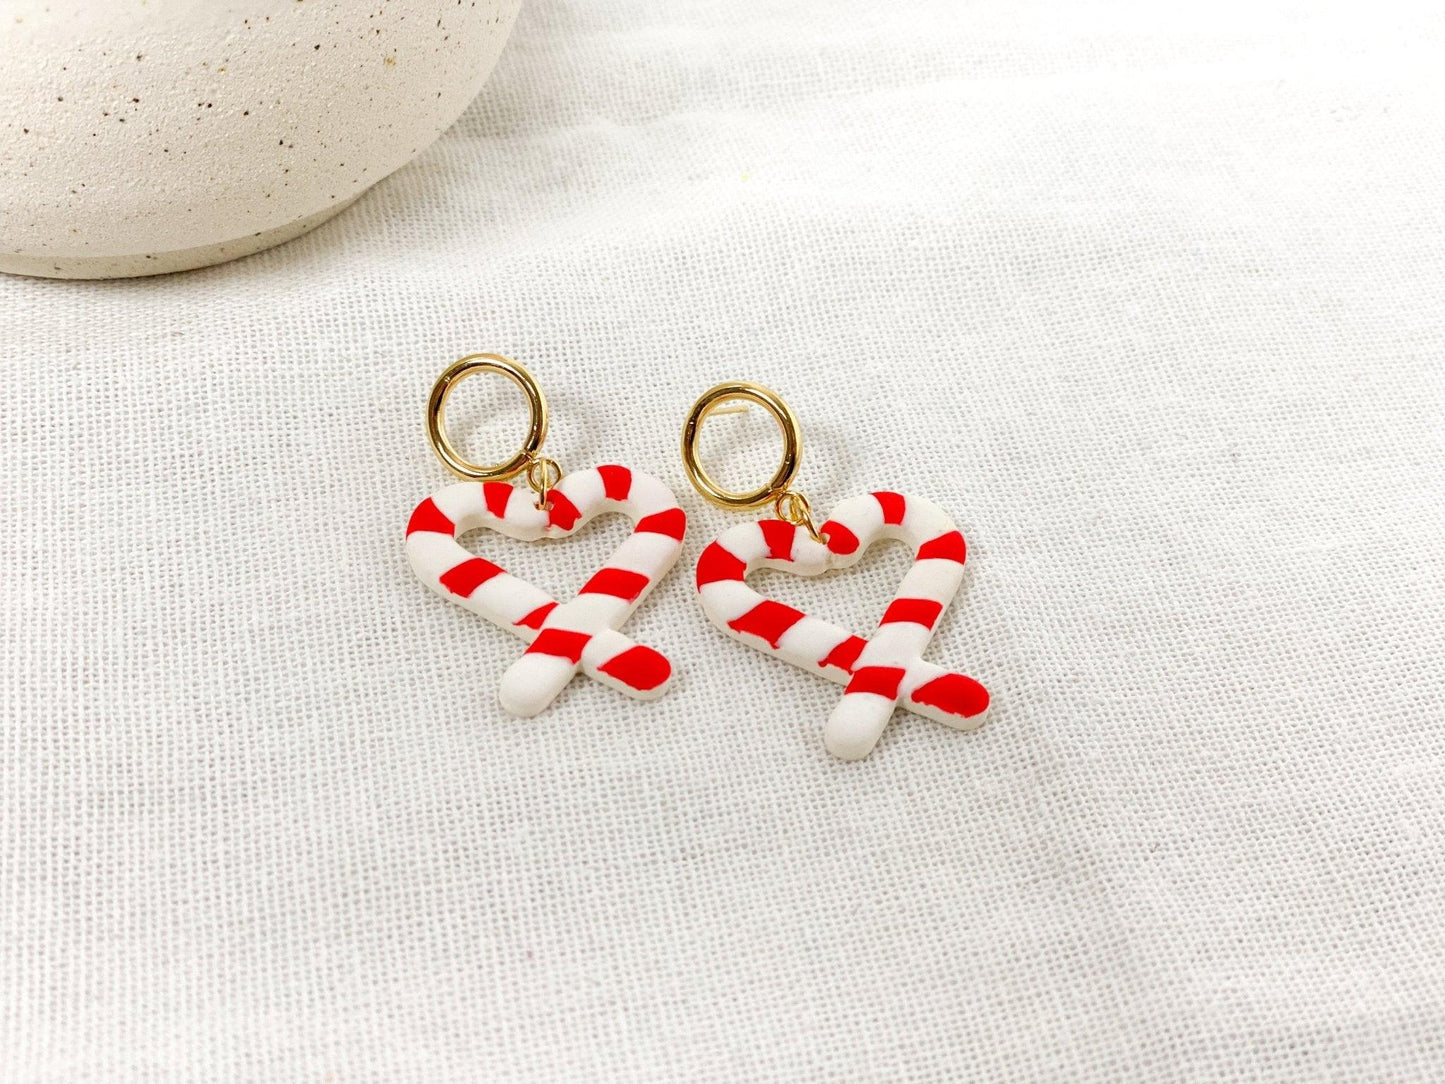 Candy Cane Earrings, Handmade Jewelry, Clay Earrings, Surgical Steel, Festive Holiday Accessories, Teacher Earrings - Harbor to Gulf Co.